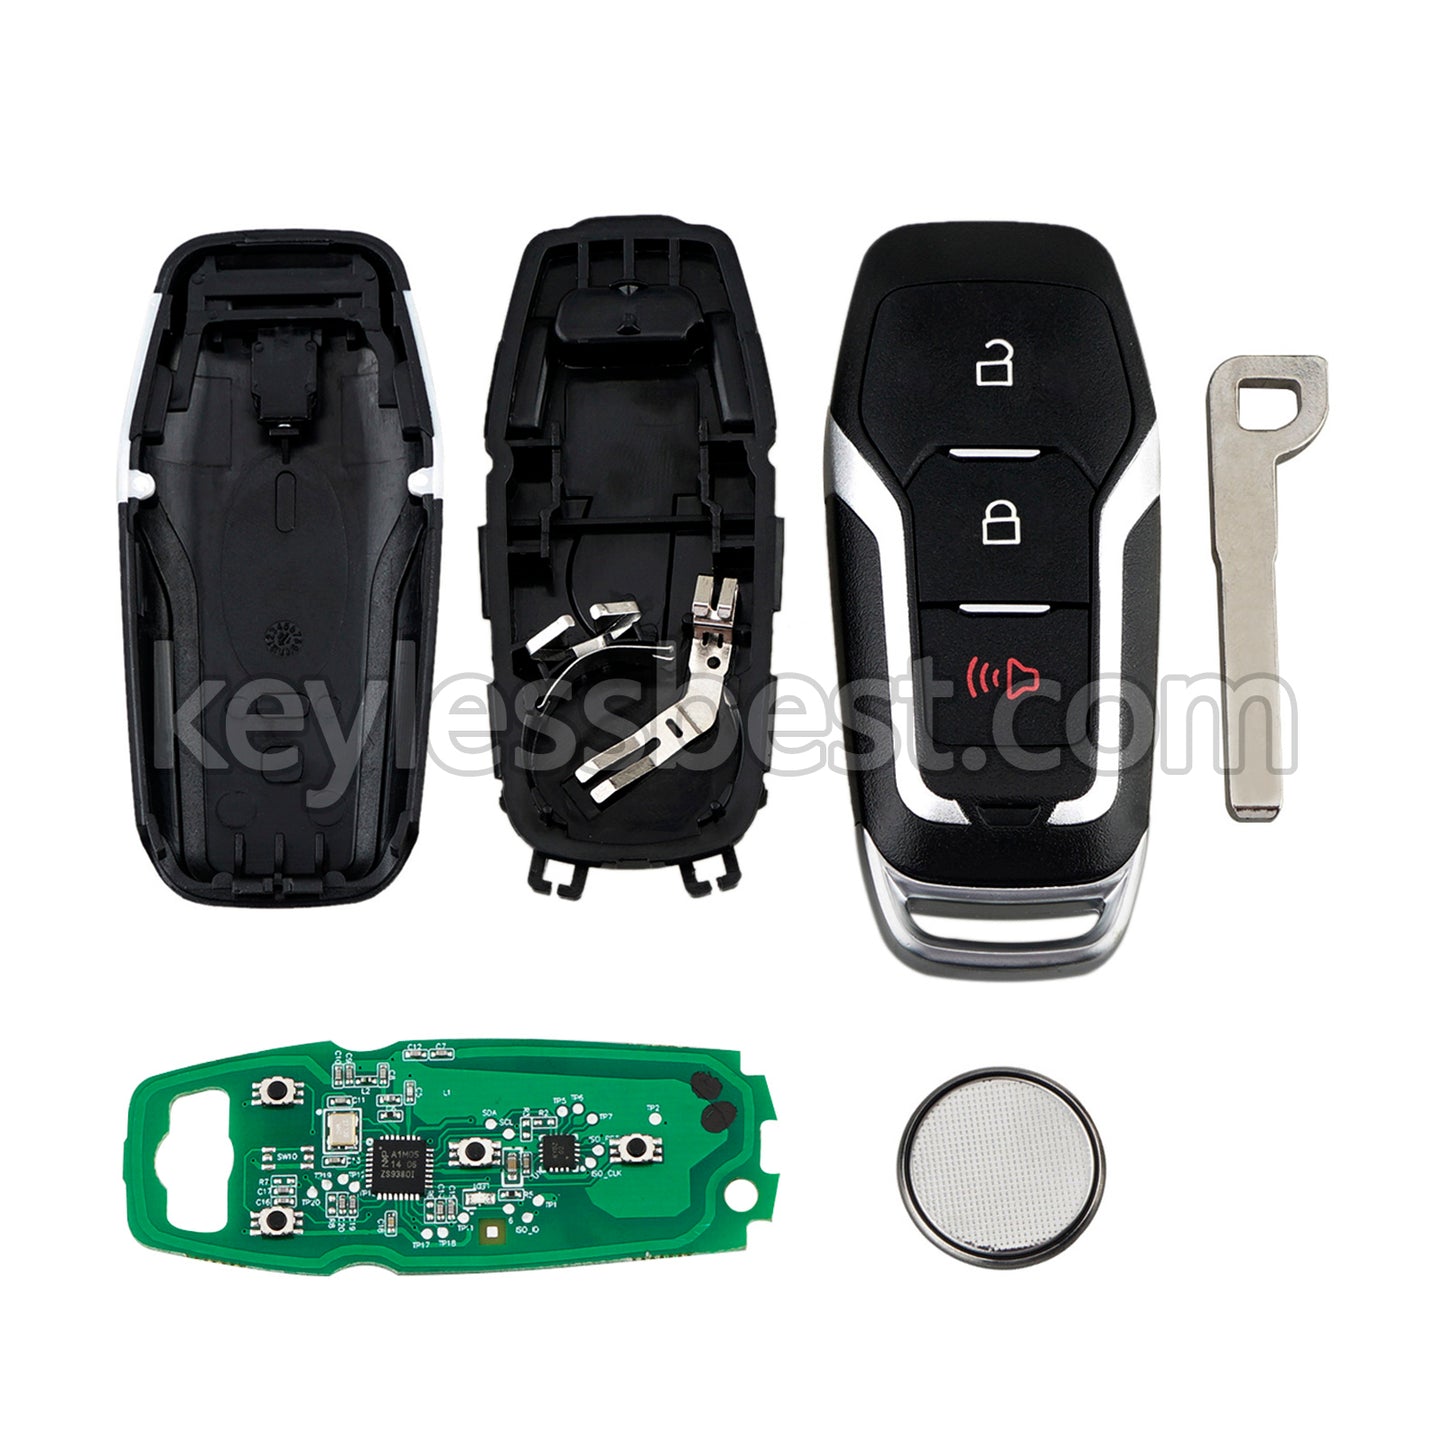 2015 - 2017 Ford F-150 Explorer / 3 Buttons Remote Key / M3N-A2C31243800 / 315MHz